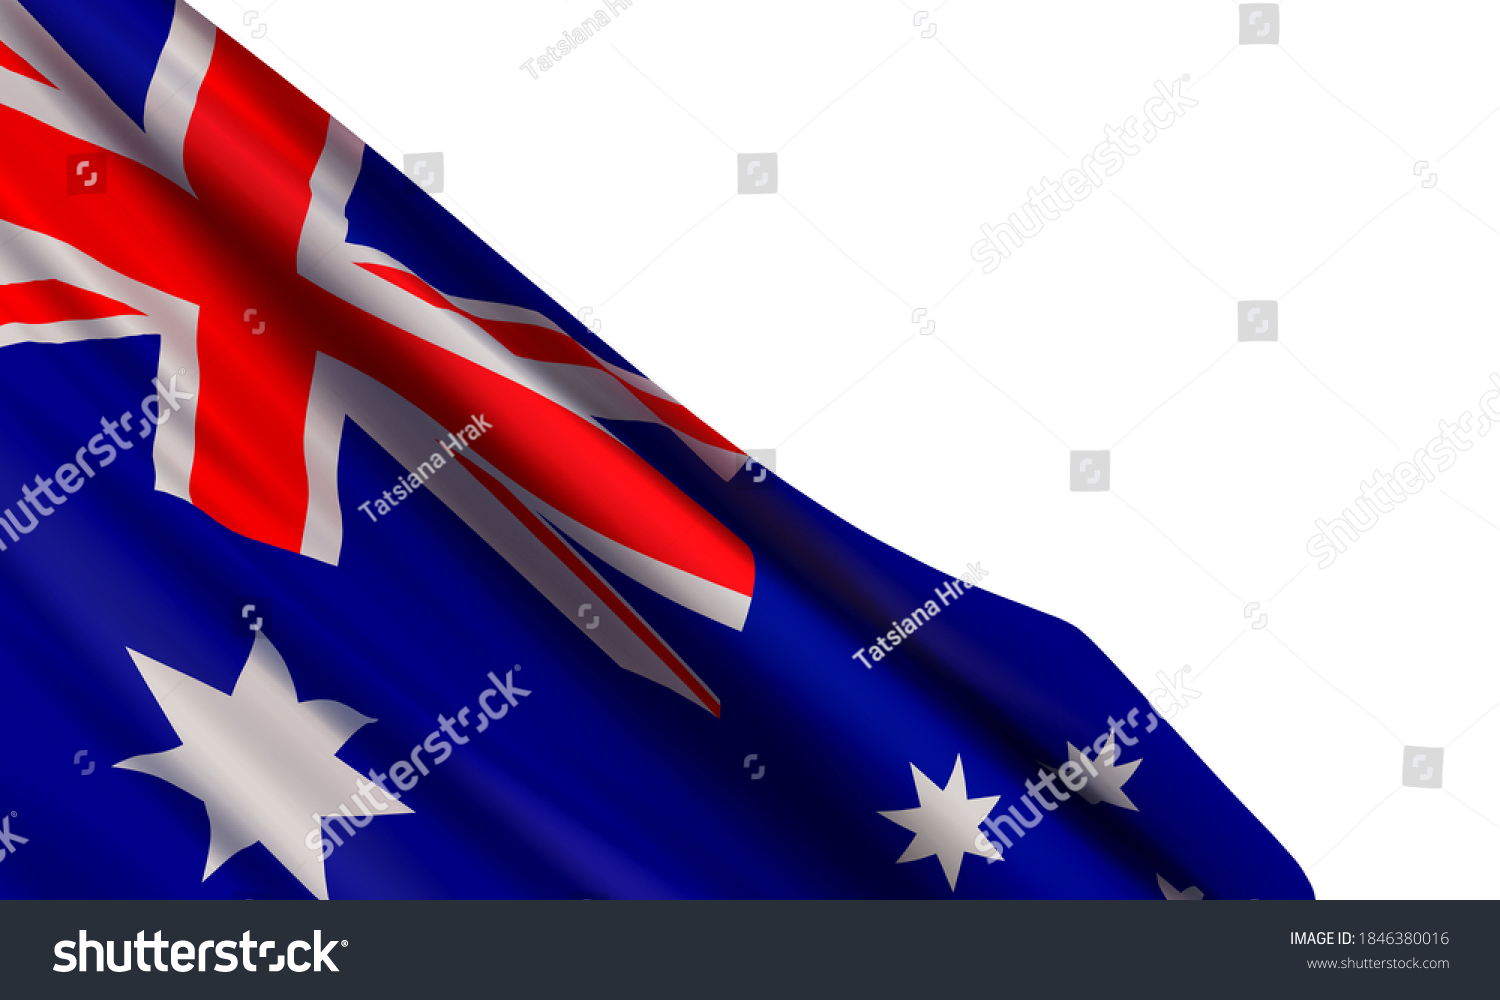 SVG of Vector illustration with a realistic flag of Australia and blank space for text isolated on white background. Vector element for Australia Day, Foundation Day, Canberra Day, Western Australia Day. svg